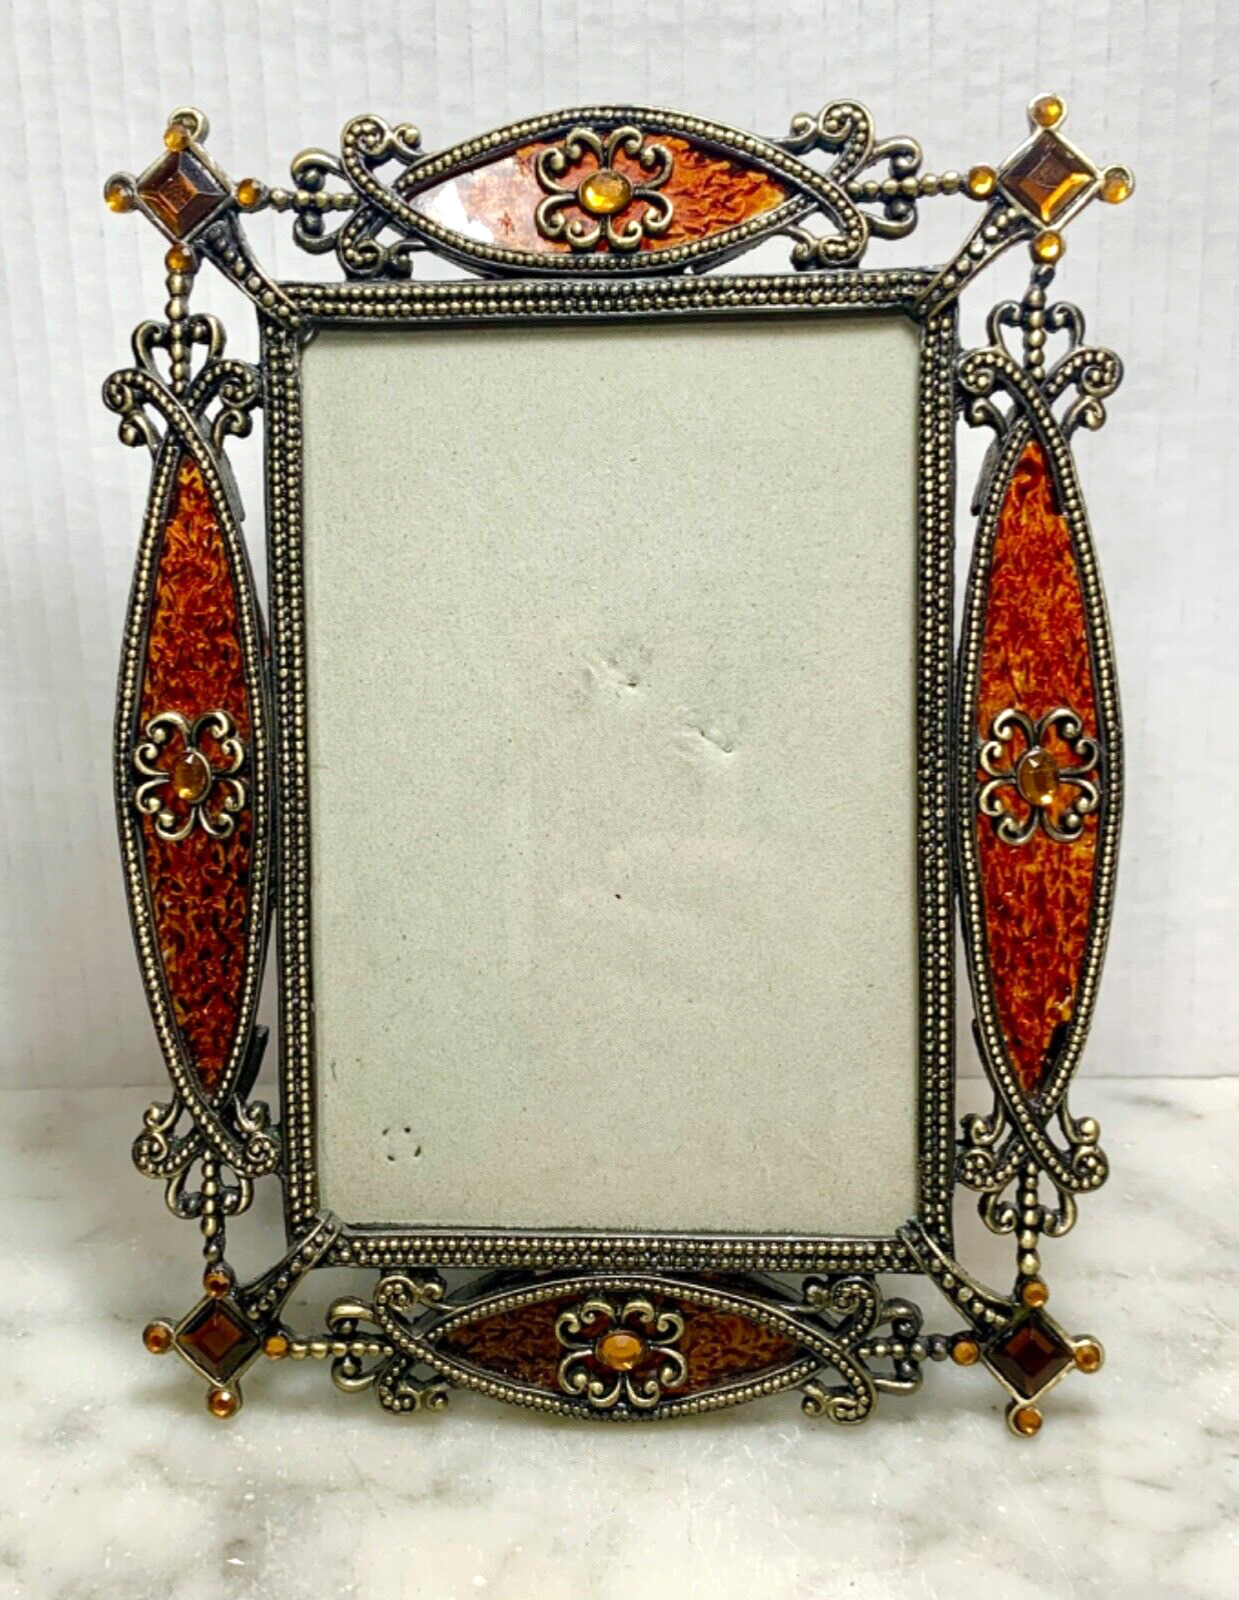 Amber Picture Frame 6x8”Rhinestones Art Deco Look Glass and Metal Ornate Vintage